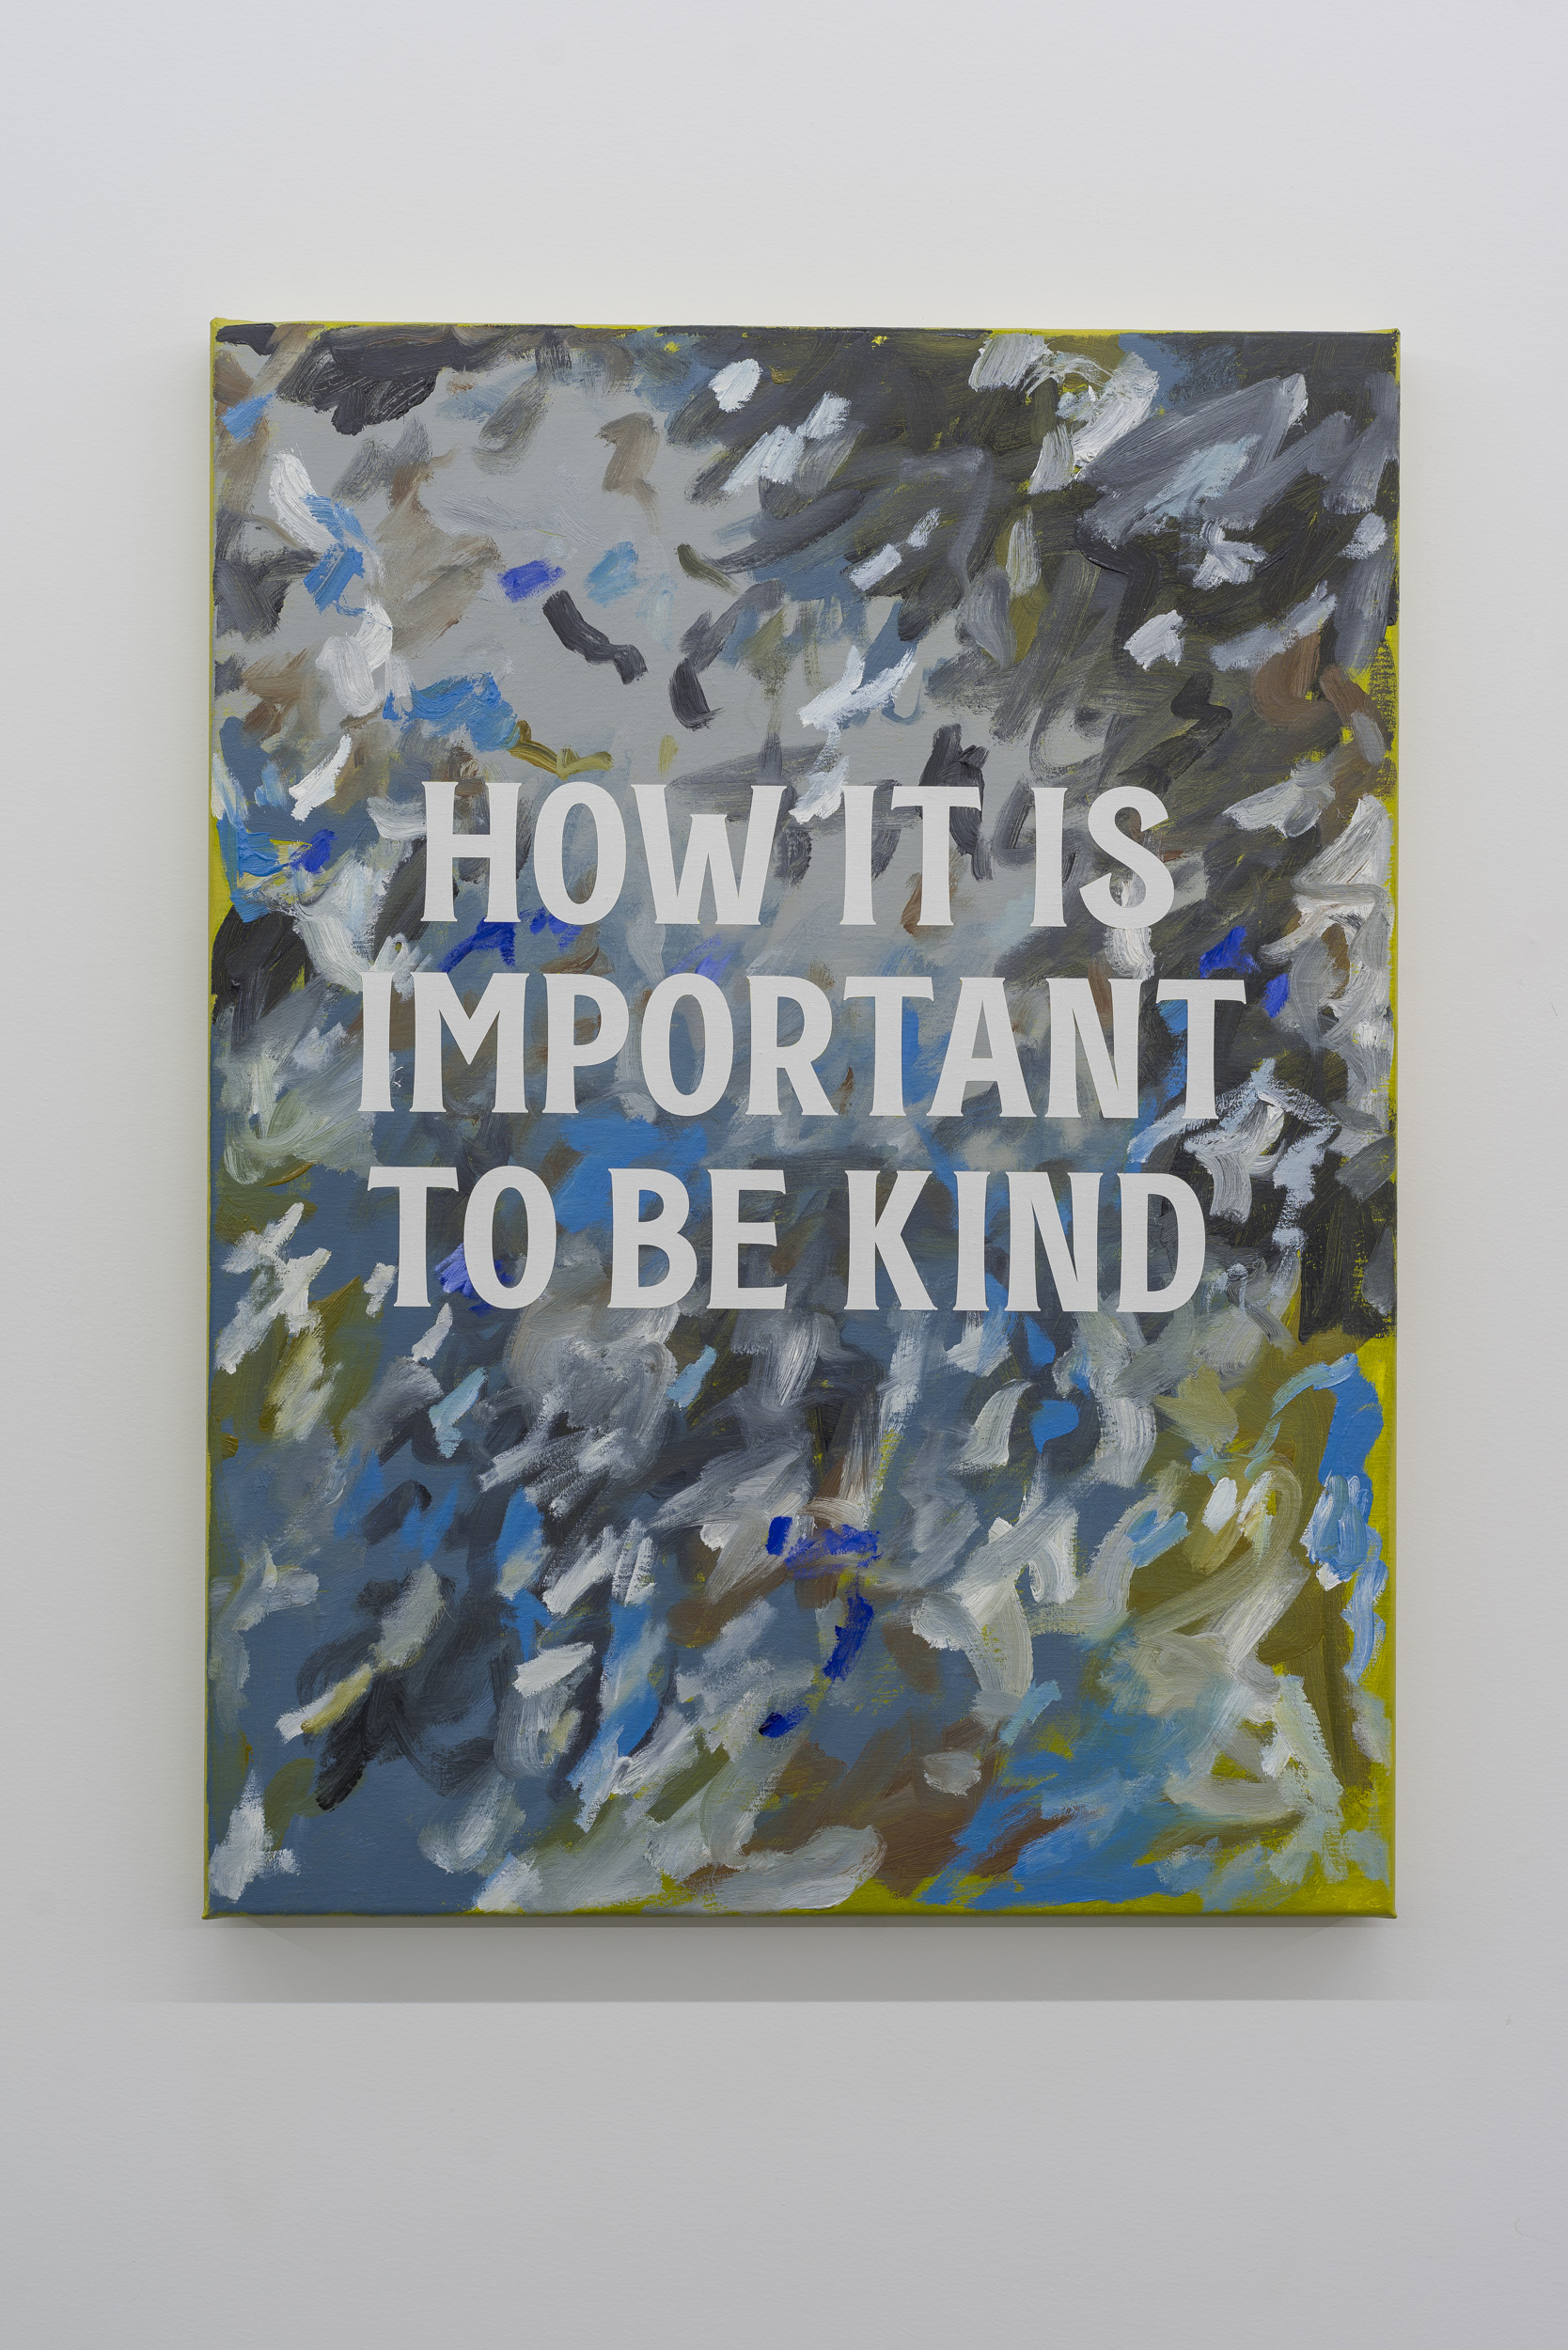 How Important It Is To Be Kind, 2017. oil on linen. Image: Kallan Macleod